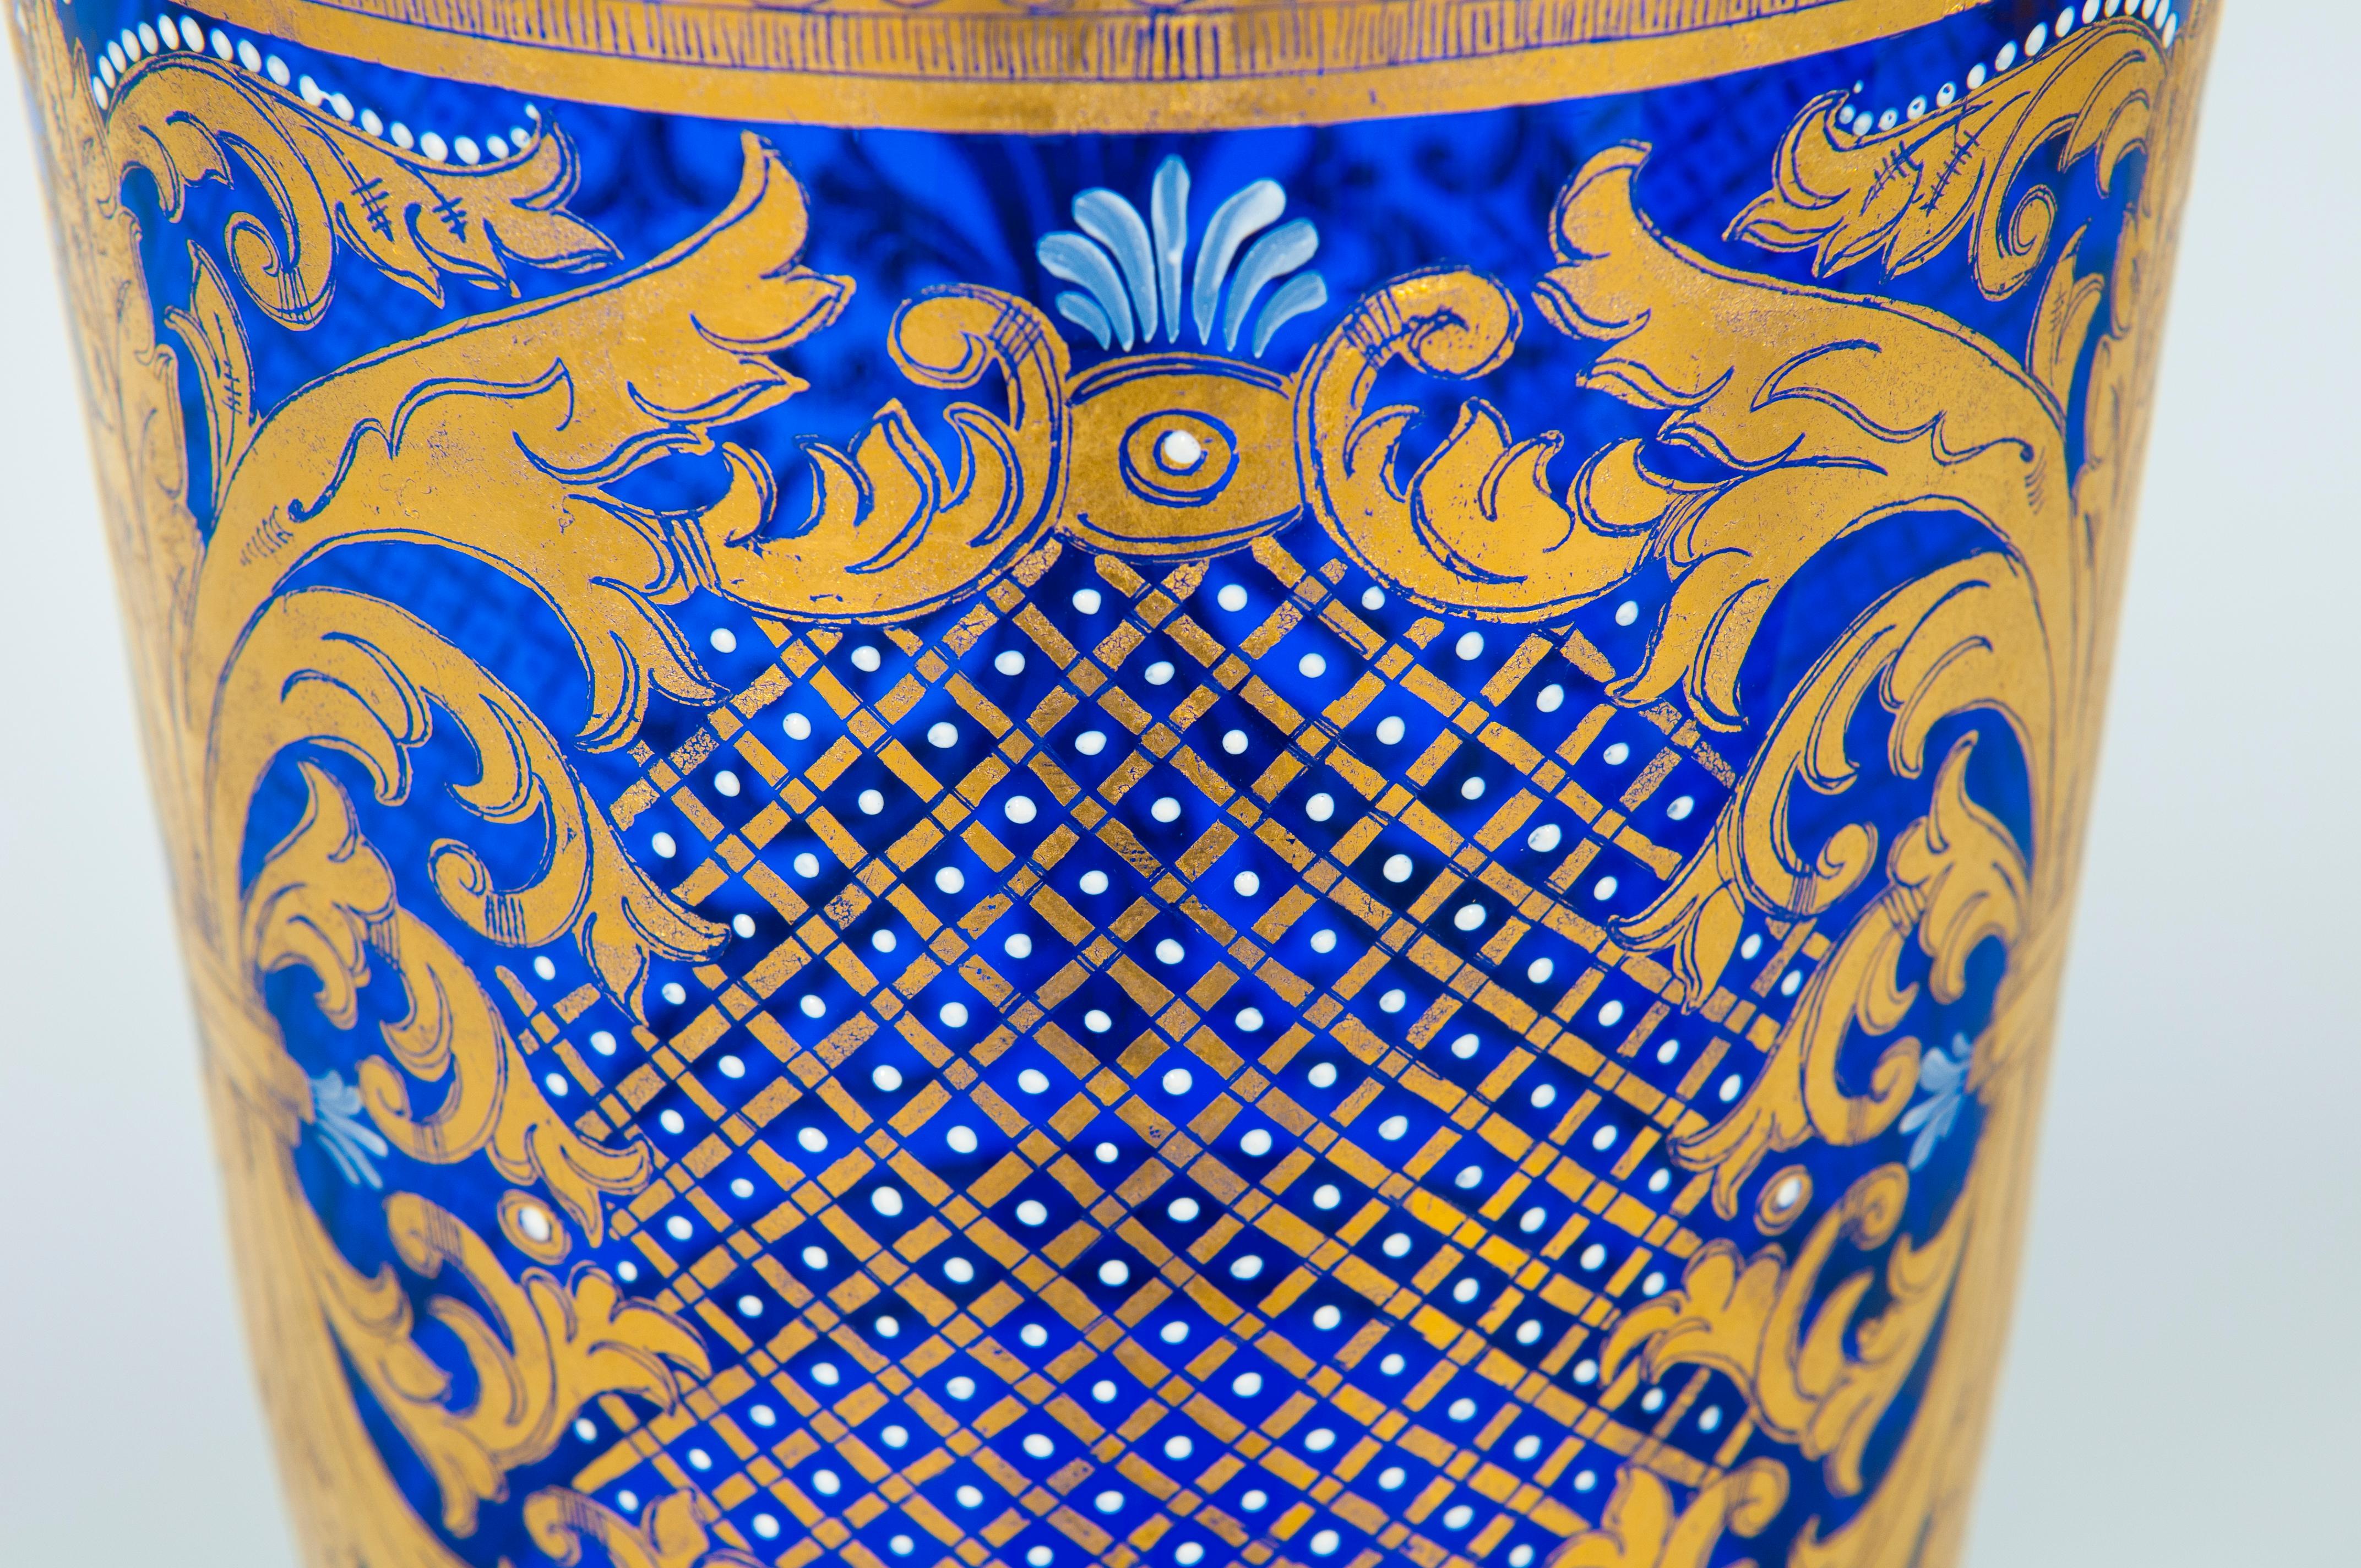 Extra-Large Murano Glass Cup with 24-Carat Gold Decorations, Italy, 1960s For Sale 5